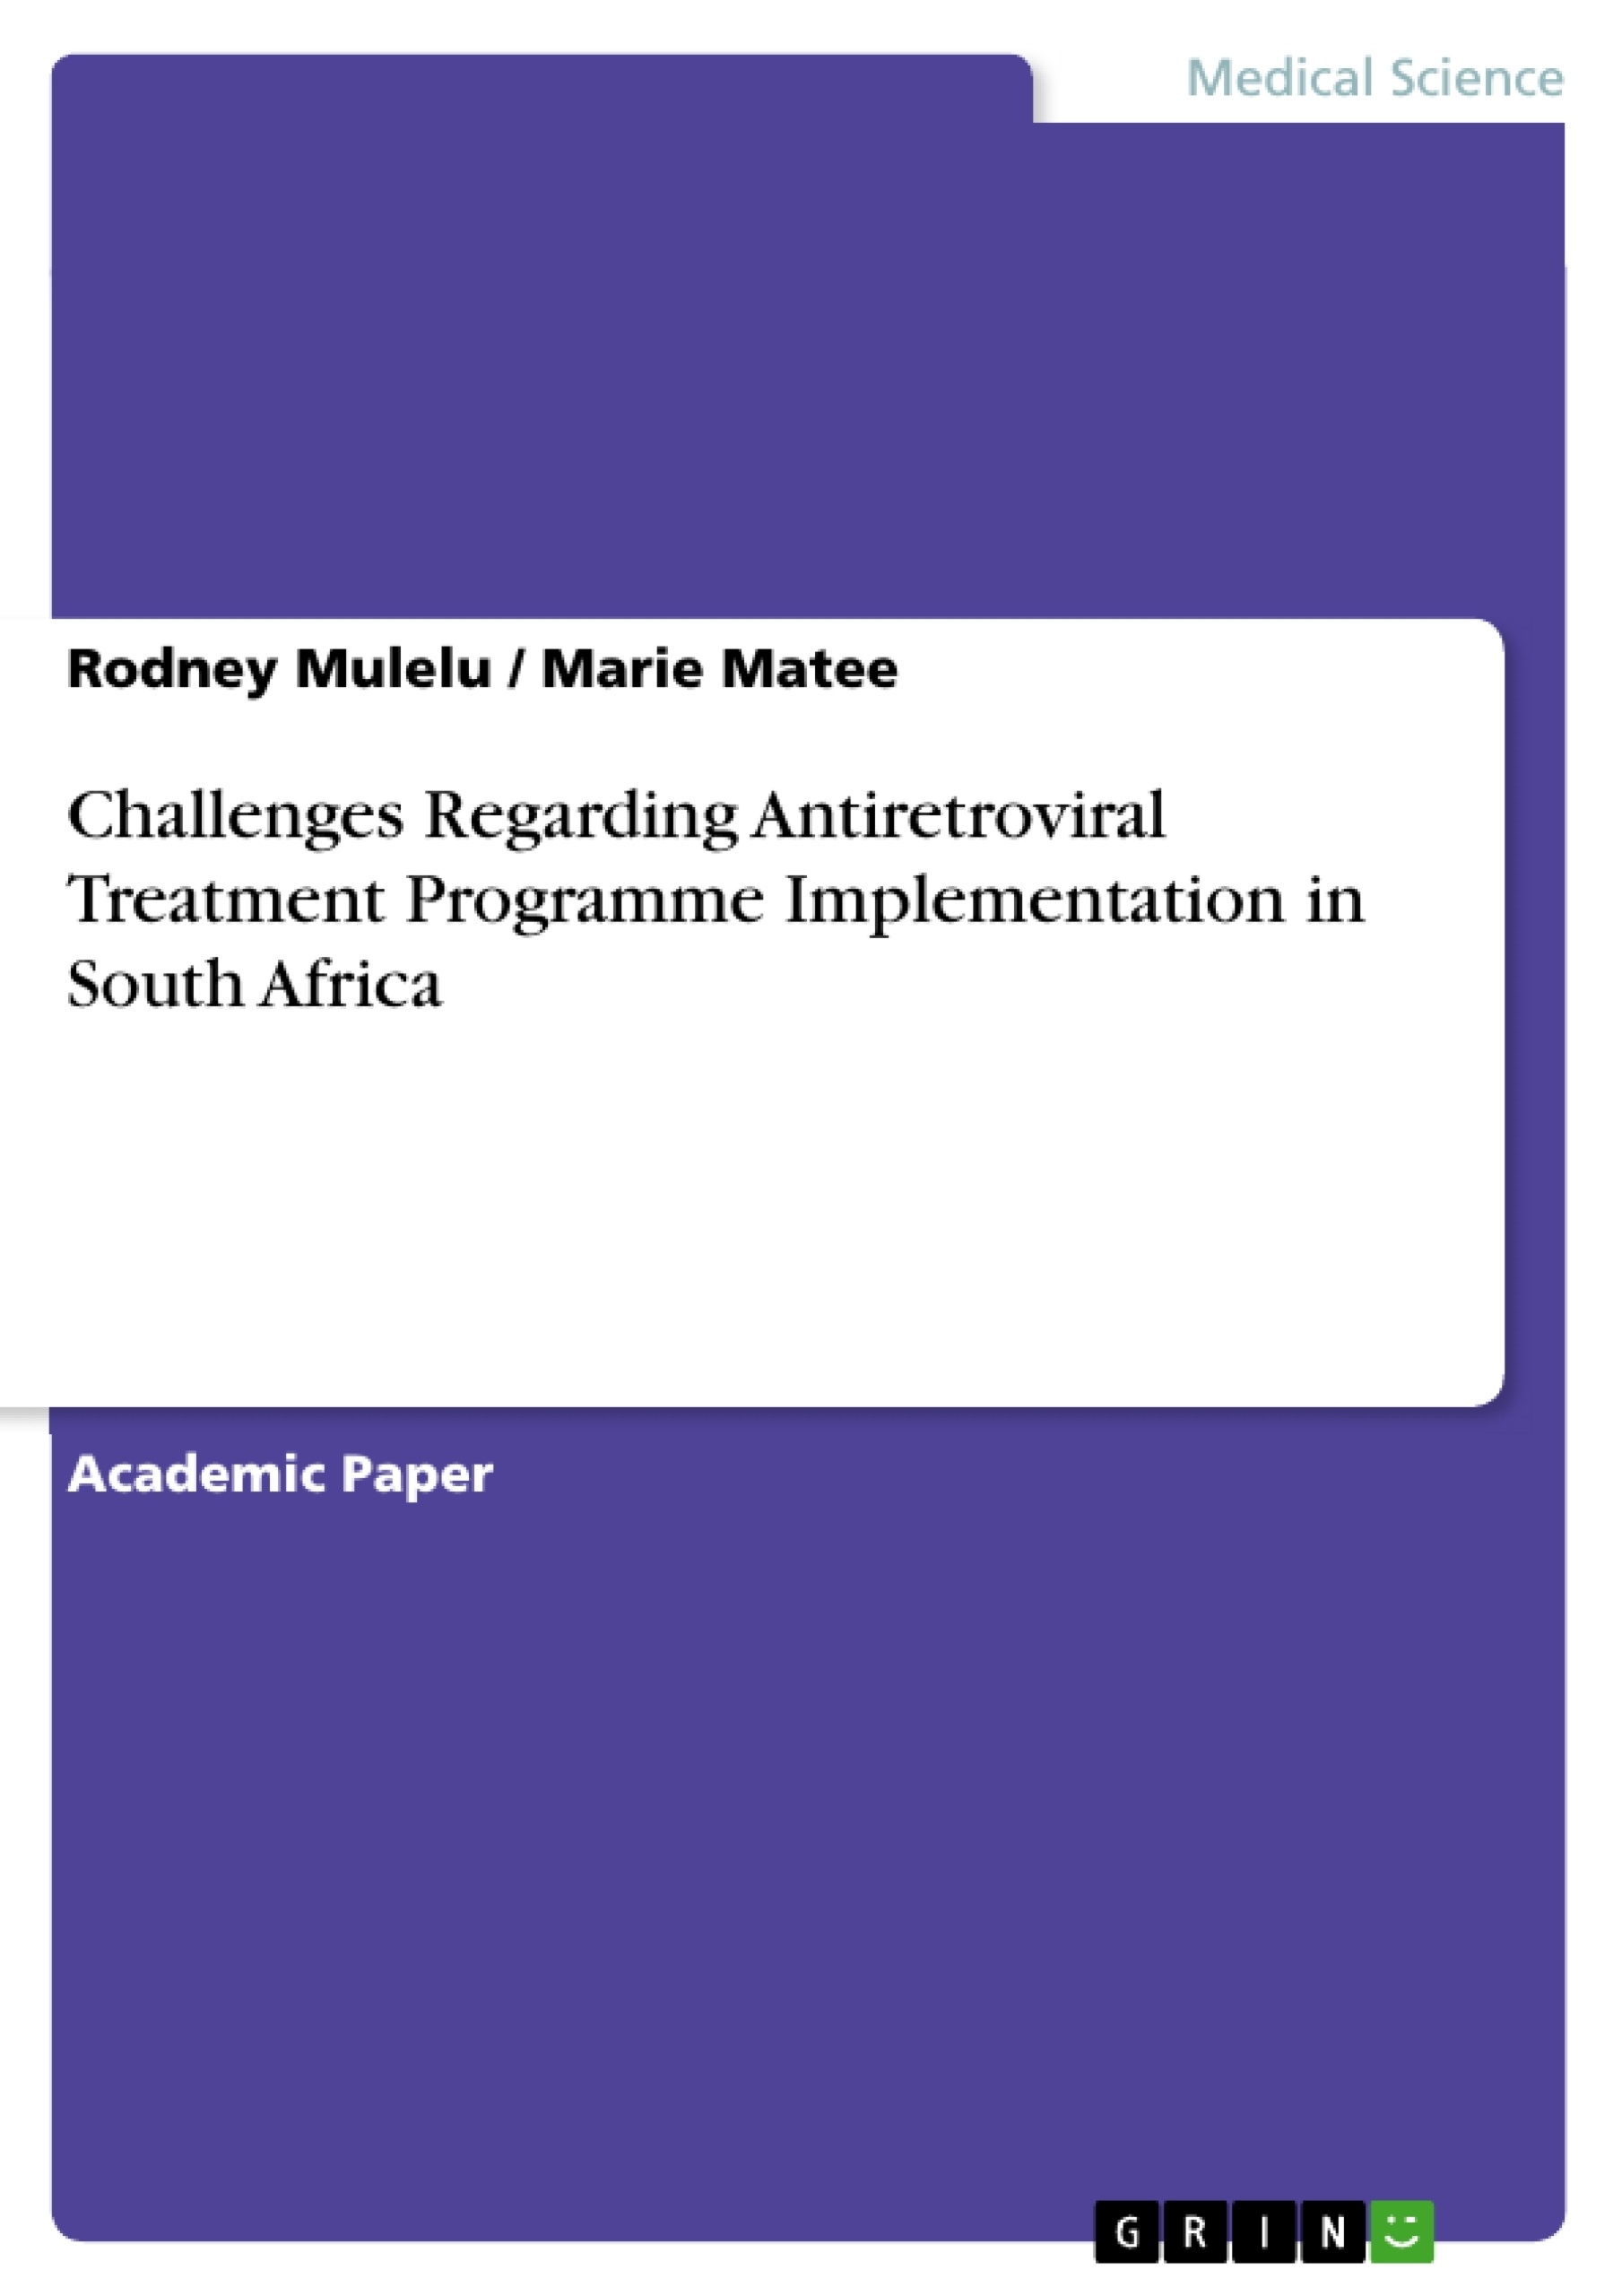 Titre: Challenges Regarding Antiretroviral Treatment Programme Implementation in South Africa